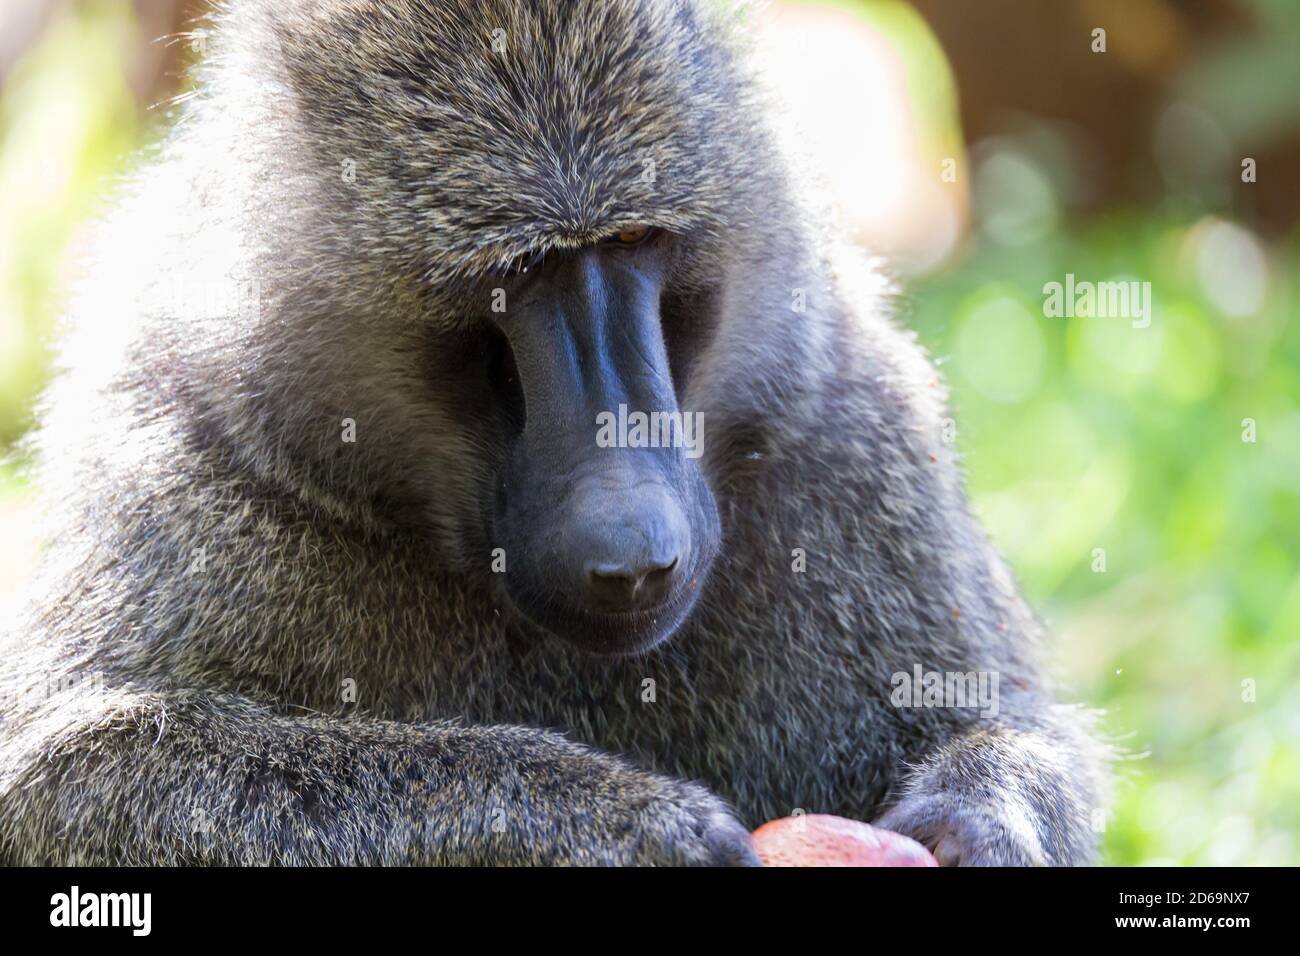 One big monkey plays with an apple. Stock Photo